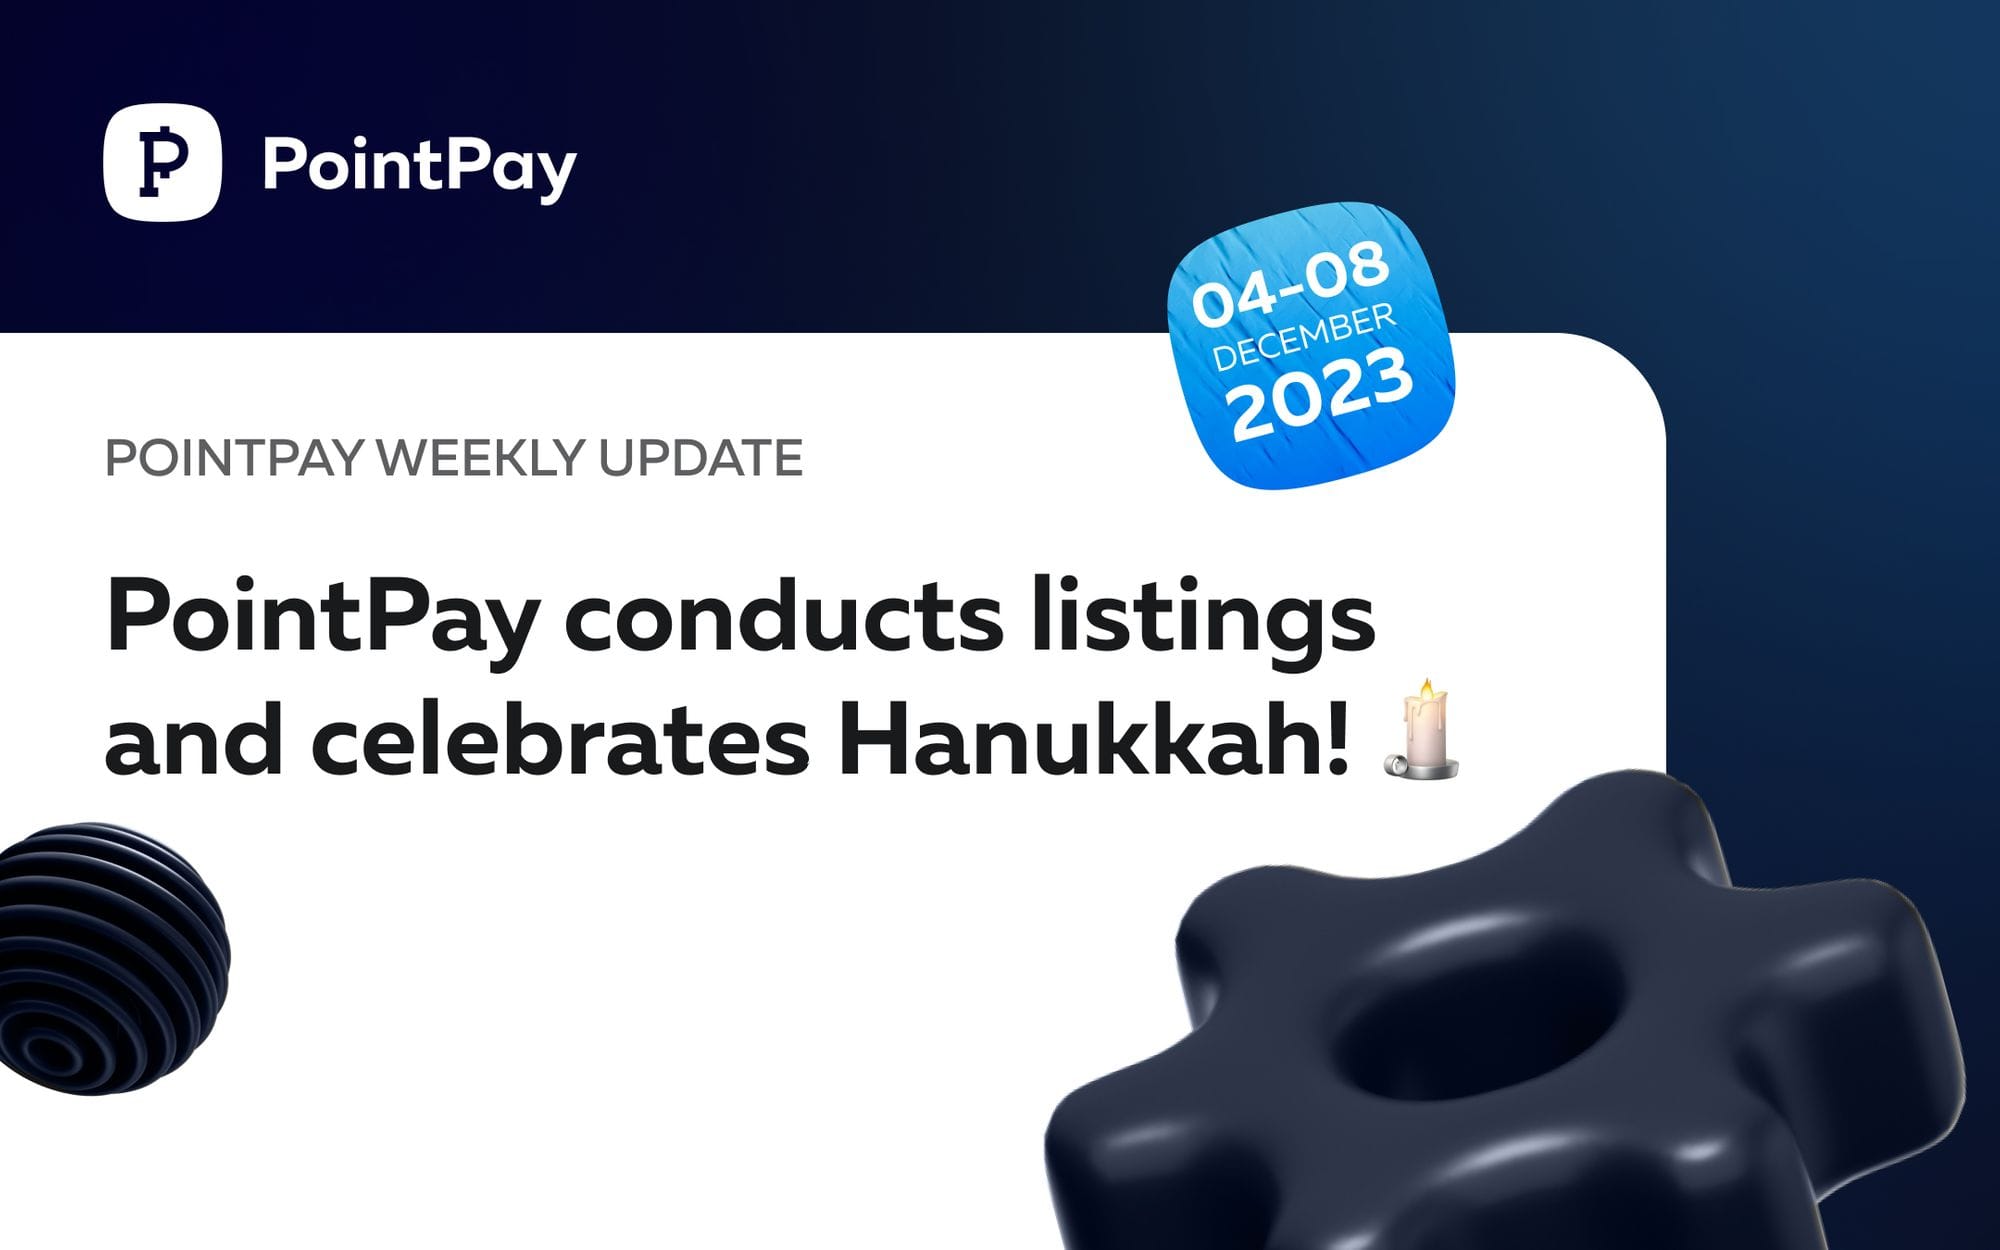 PointPay Weekly Update (4–8 December 2023)